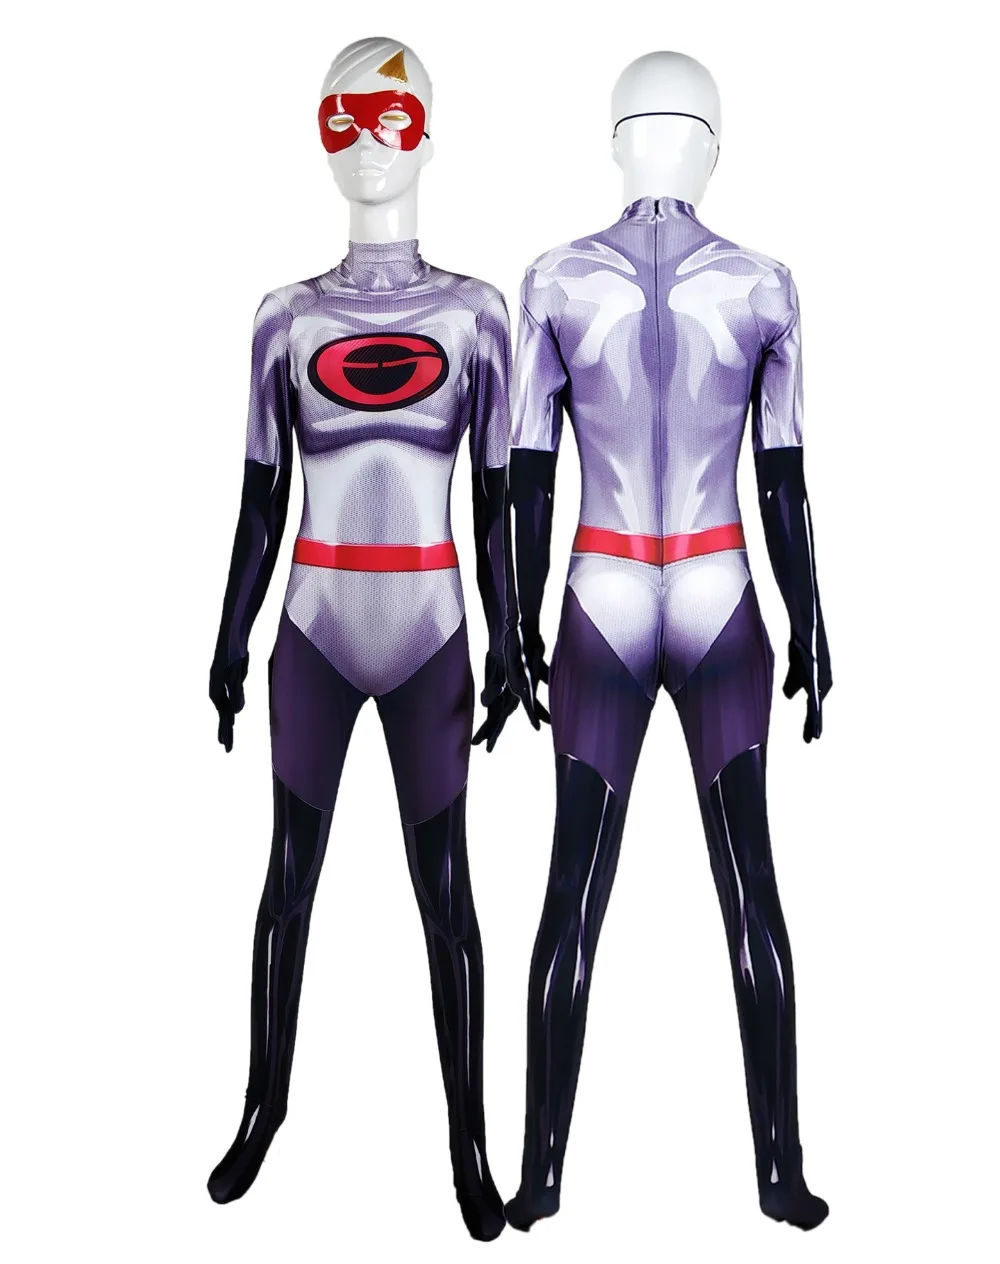 Elastigirl Cosplay Costume For Adults And Kids Female Superhero Zentai Suit  For Halloween Party Target Jumpsuit Q231010 From Mengqiqi02, $7.62